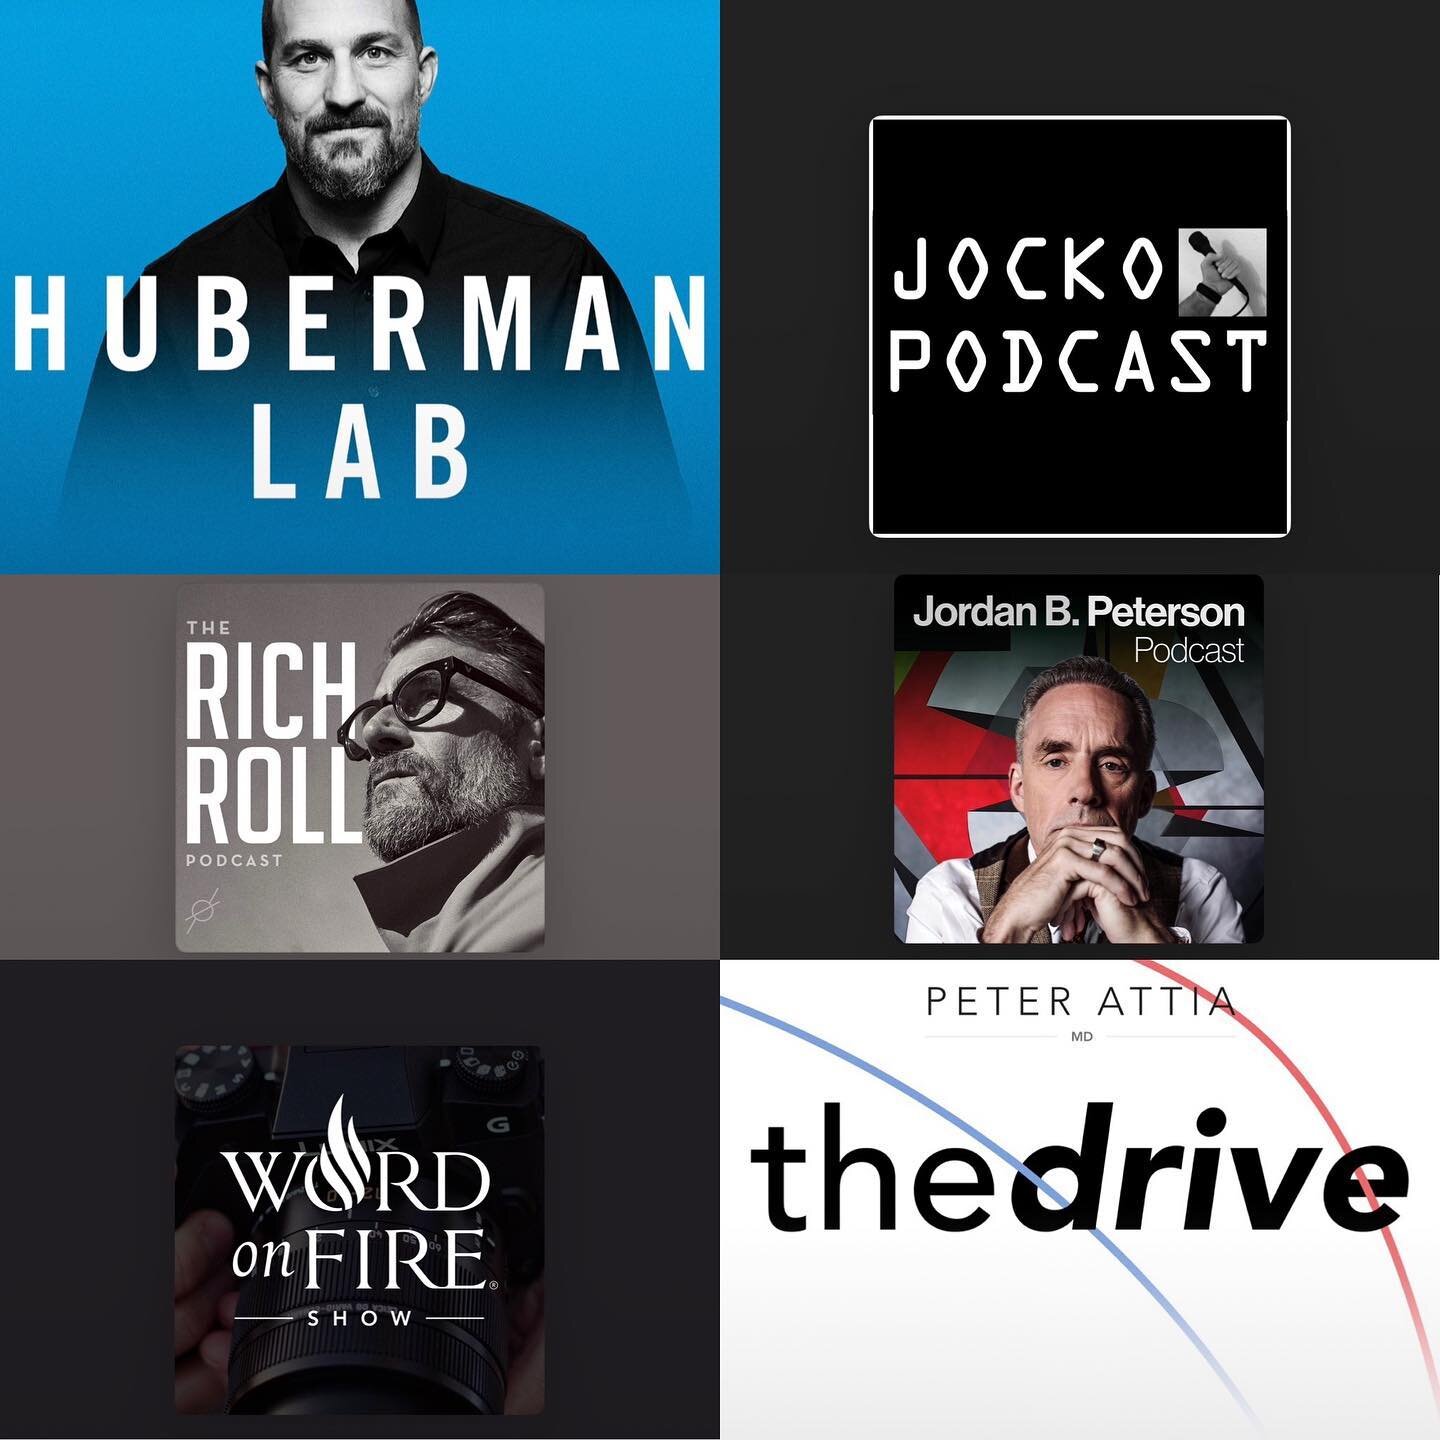 I believe it to be our job as fitness professionals to constantly educate ourselves on the latest information available to us. 
In the car is a great way to make use of that time with a podcast. These are just some of the ones I frequent as they pert